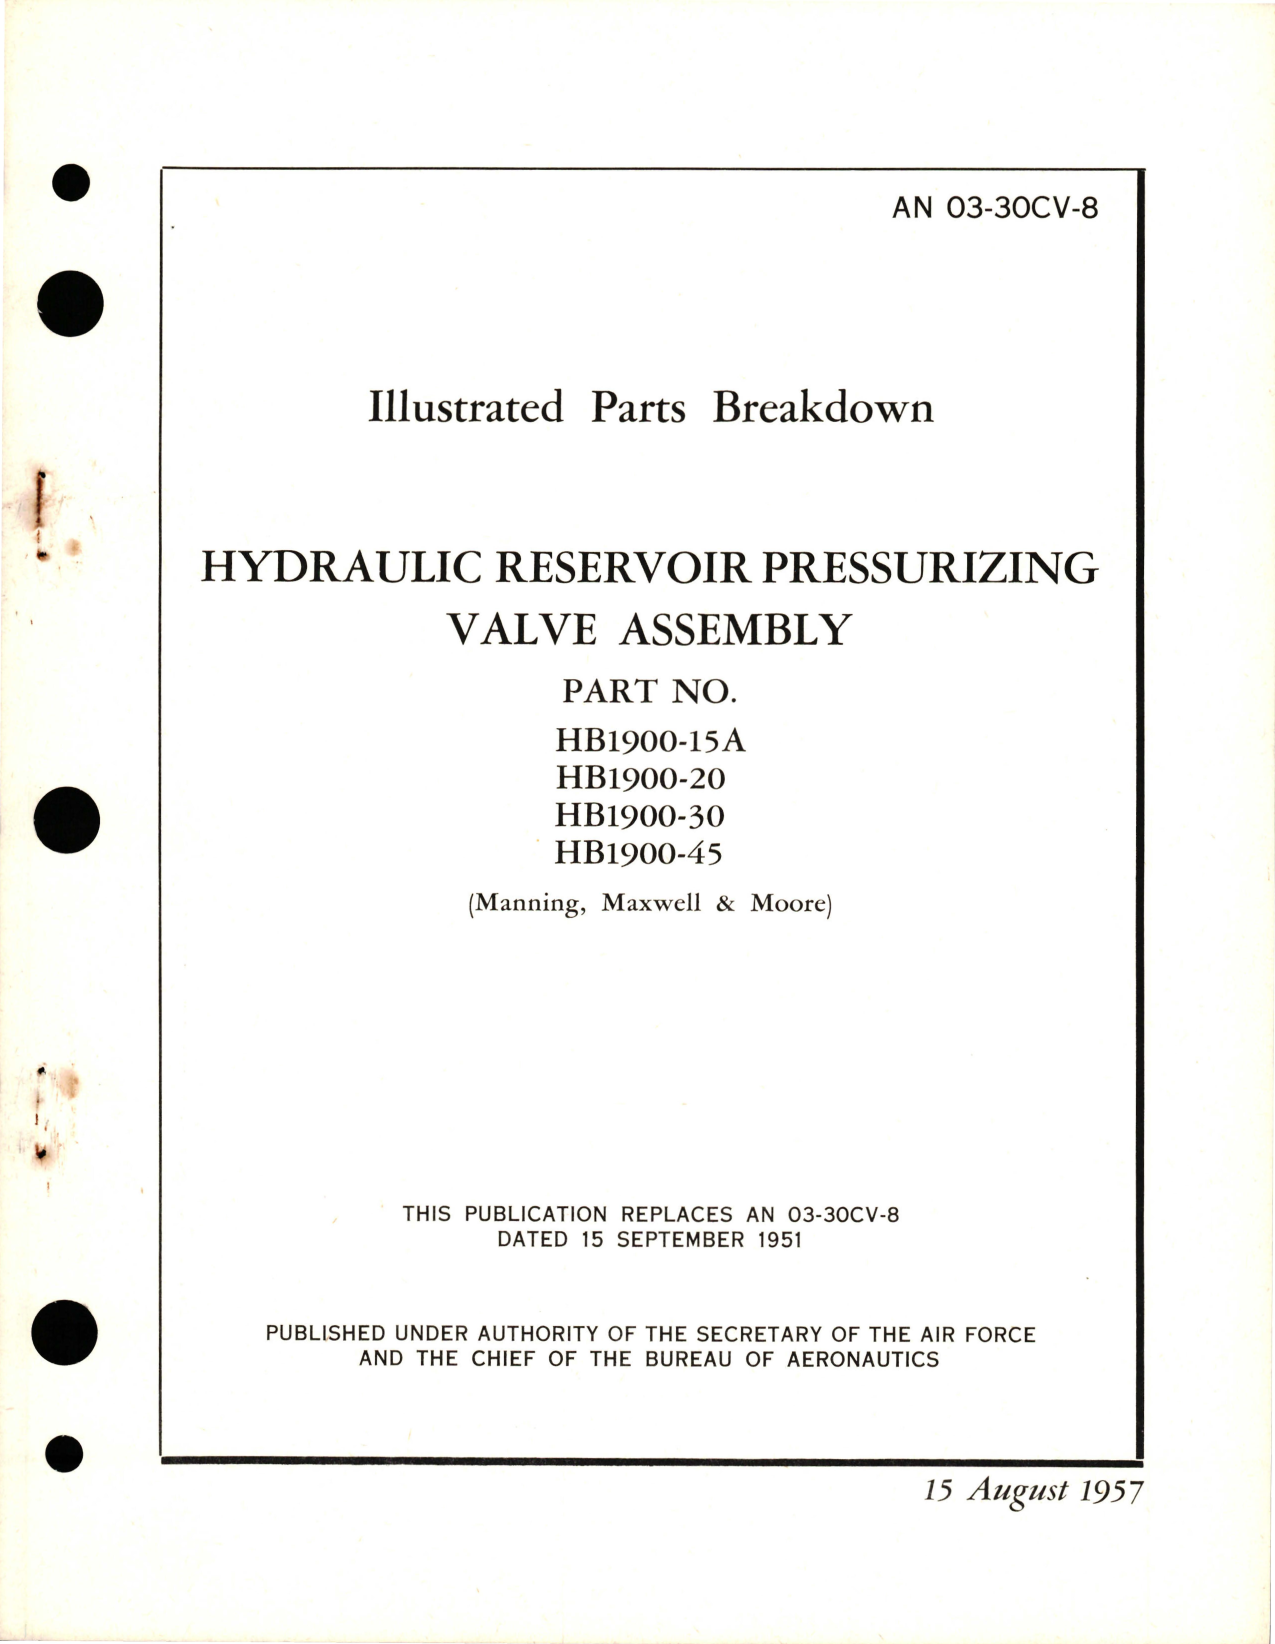 Sample page 1 from AirCorps Library document: Illustrated Parts Breakdown for Hydraulic Reservoir Pressurizing Valve Assembly